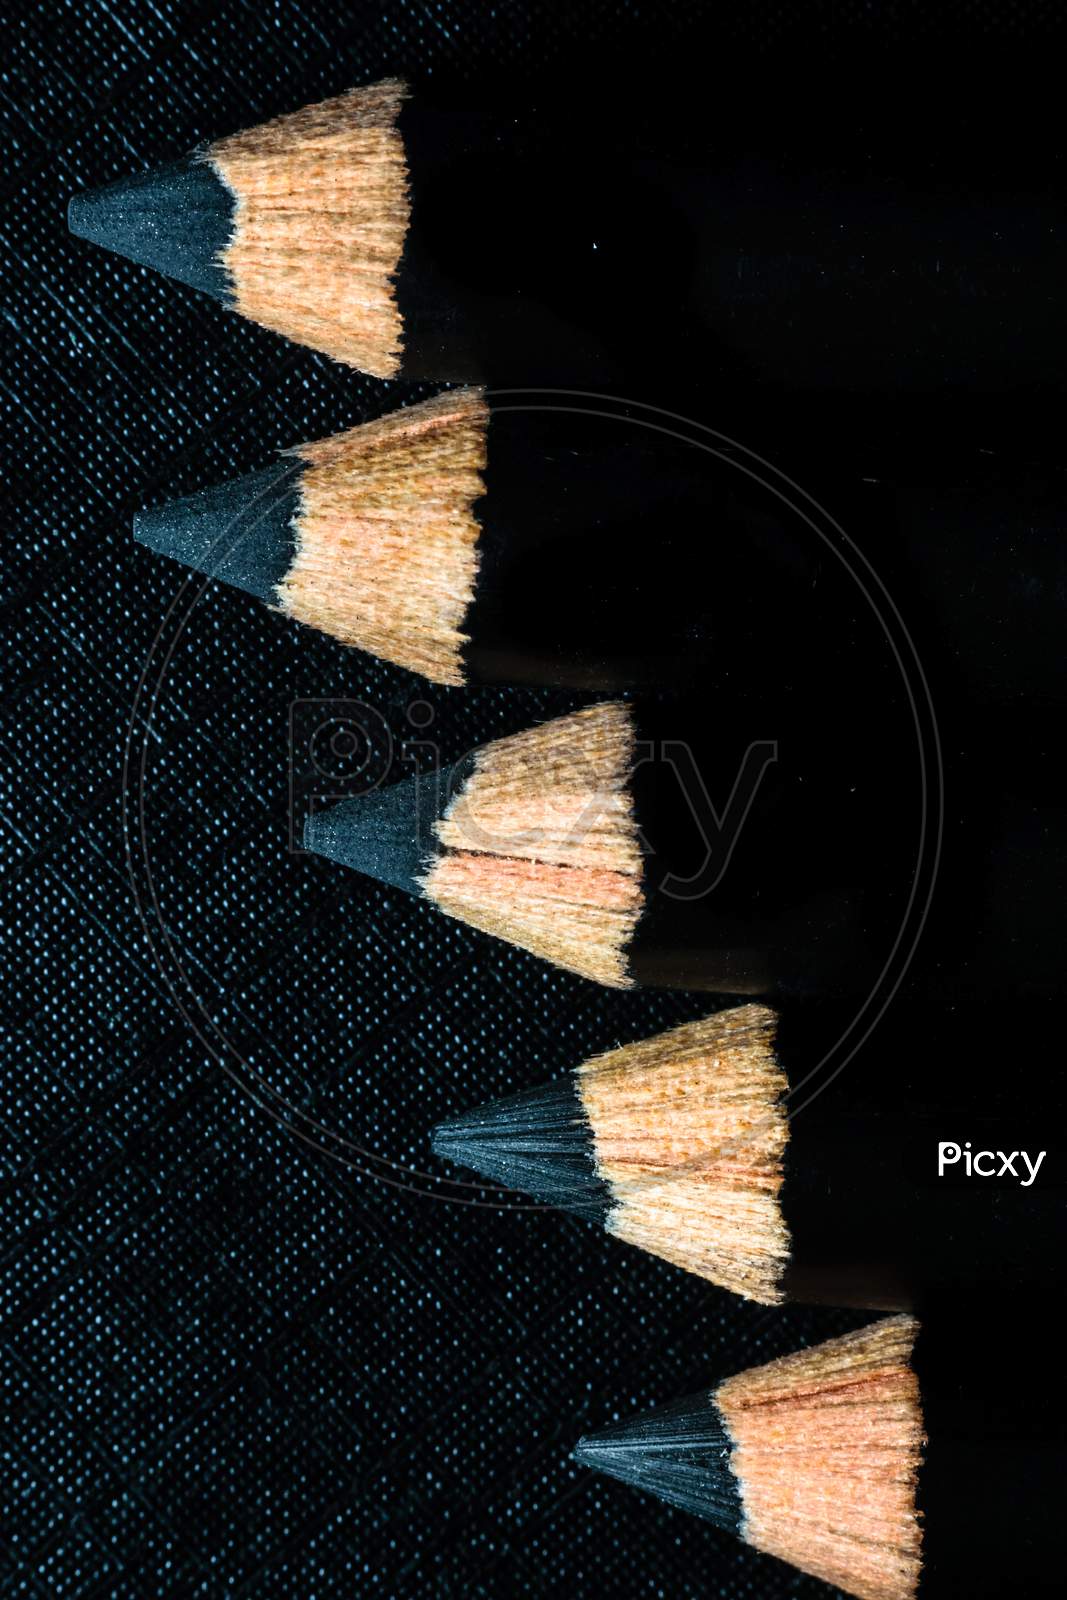 A Group Of Pencils Are Kept On A Dark Paper In Ascending Order